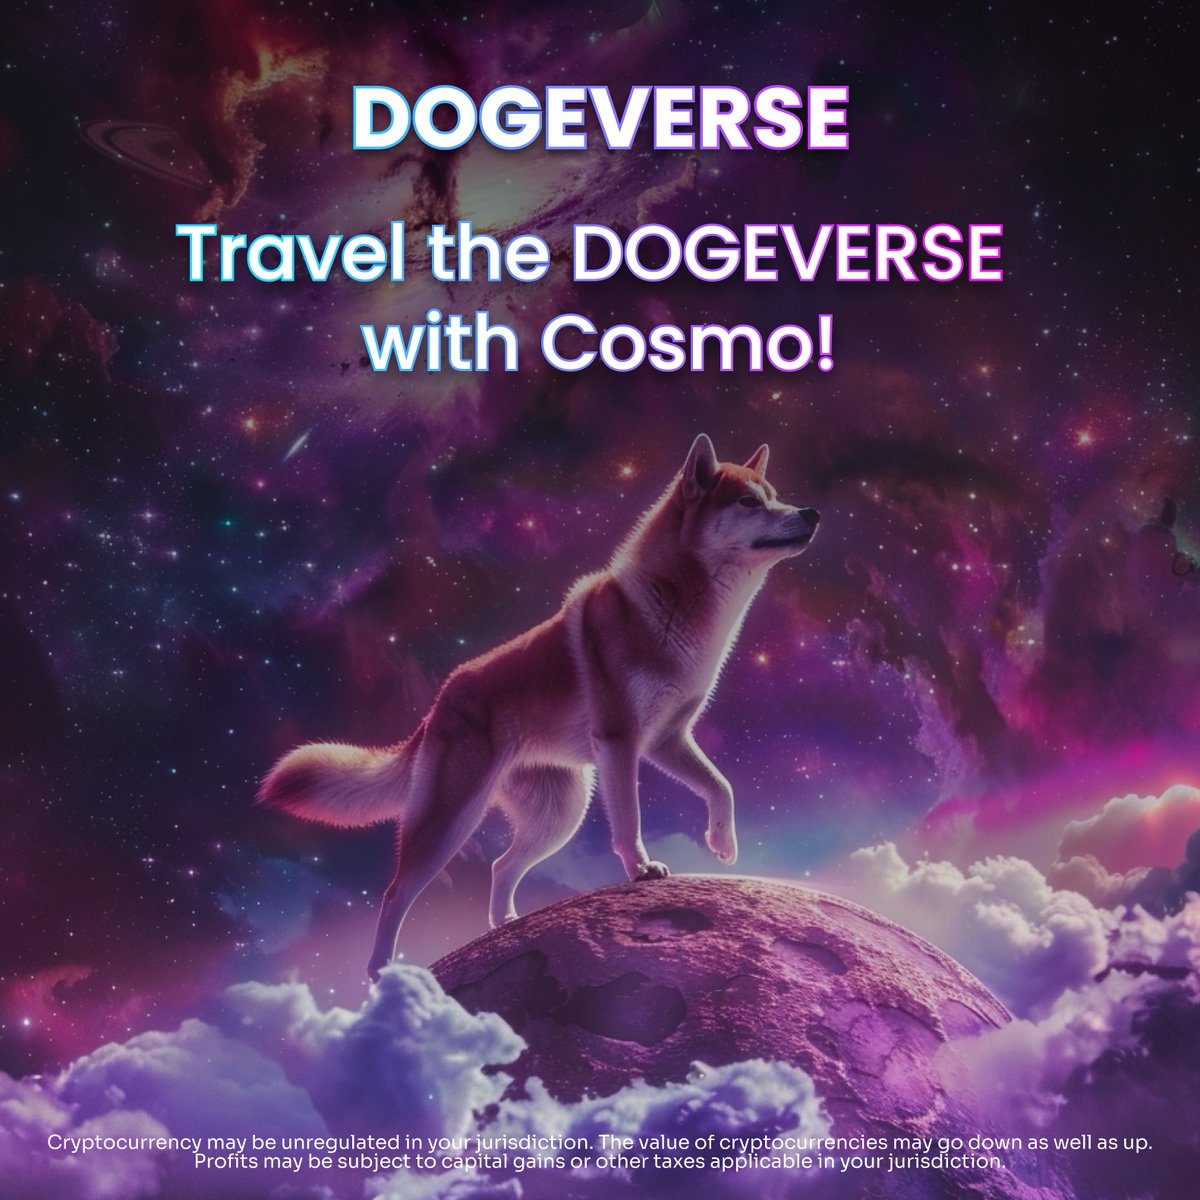 🚀 Say hello to #Cosmo! 🌟

The groundbreaking cosmic #Doge! 🌌🐕

Explore $DOGEVERSE across different chains:

#Ethereum 🌐
#BNB Smart Chain 🔗
#Polygon 📦
#Avalanche C-Chain ❄️
#Base 🚀

Keep an eye out for upcoming releases on:

#Solana ☀️

Ready for the adventure ahead? 🚀